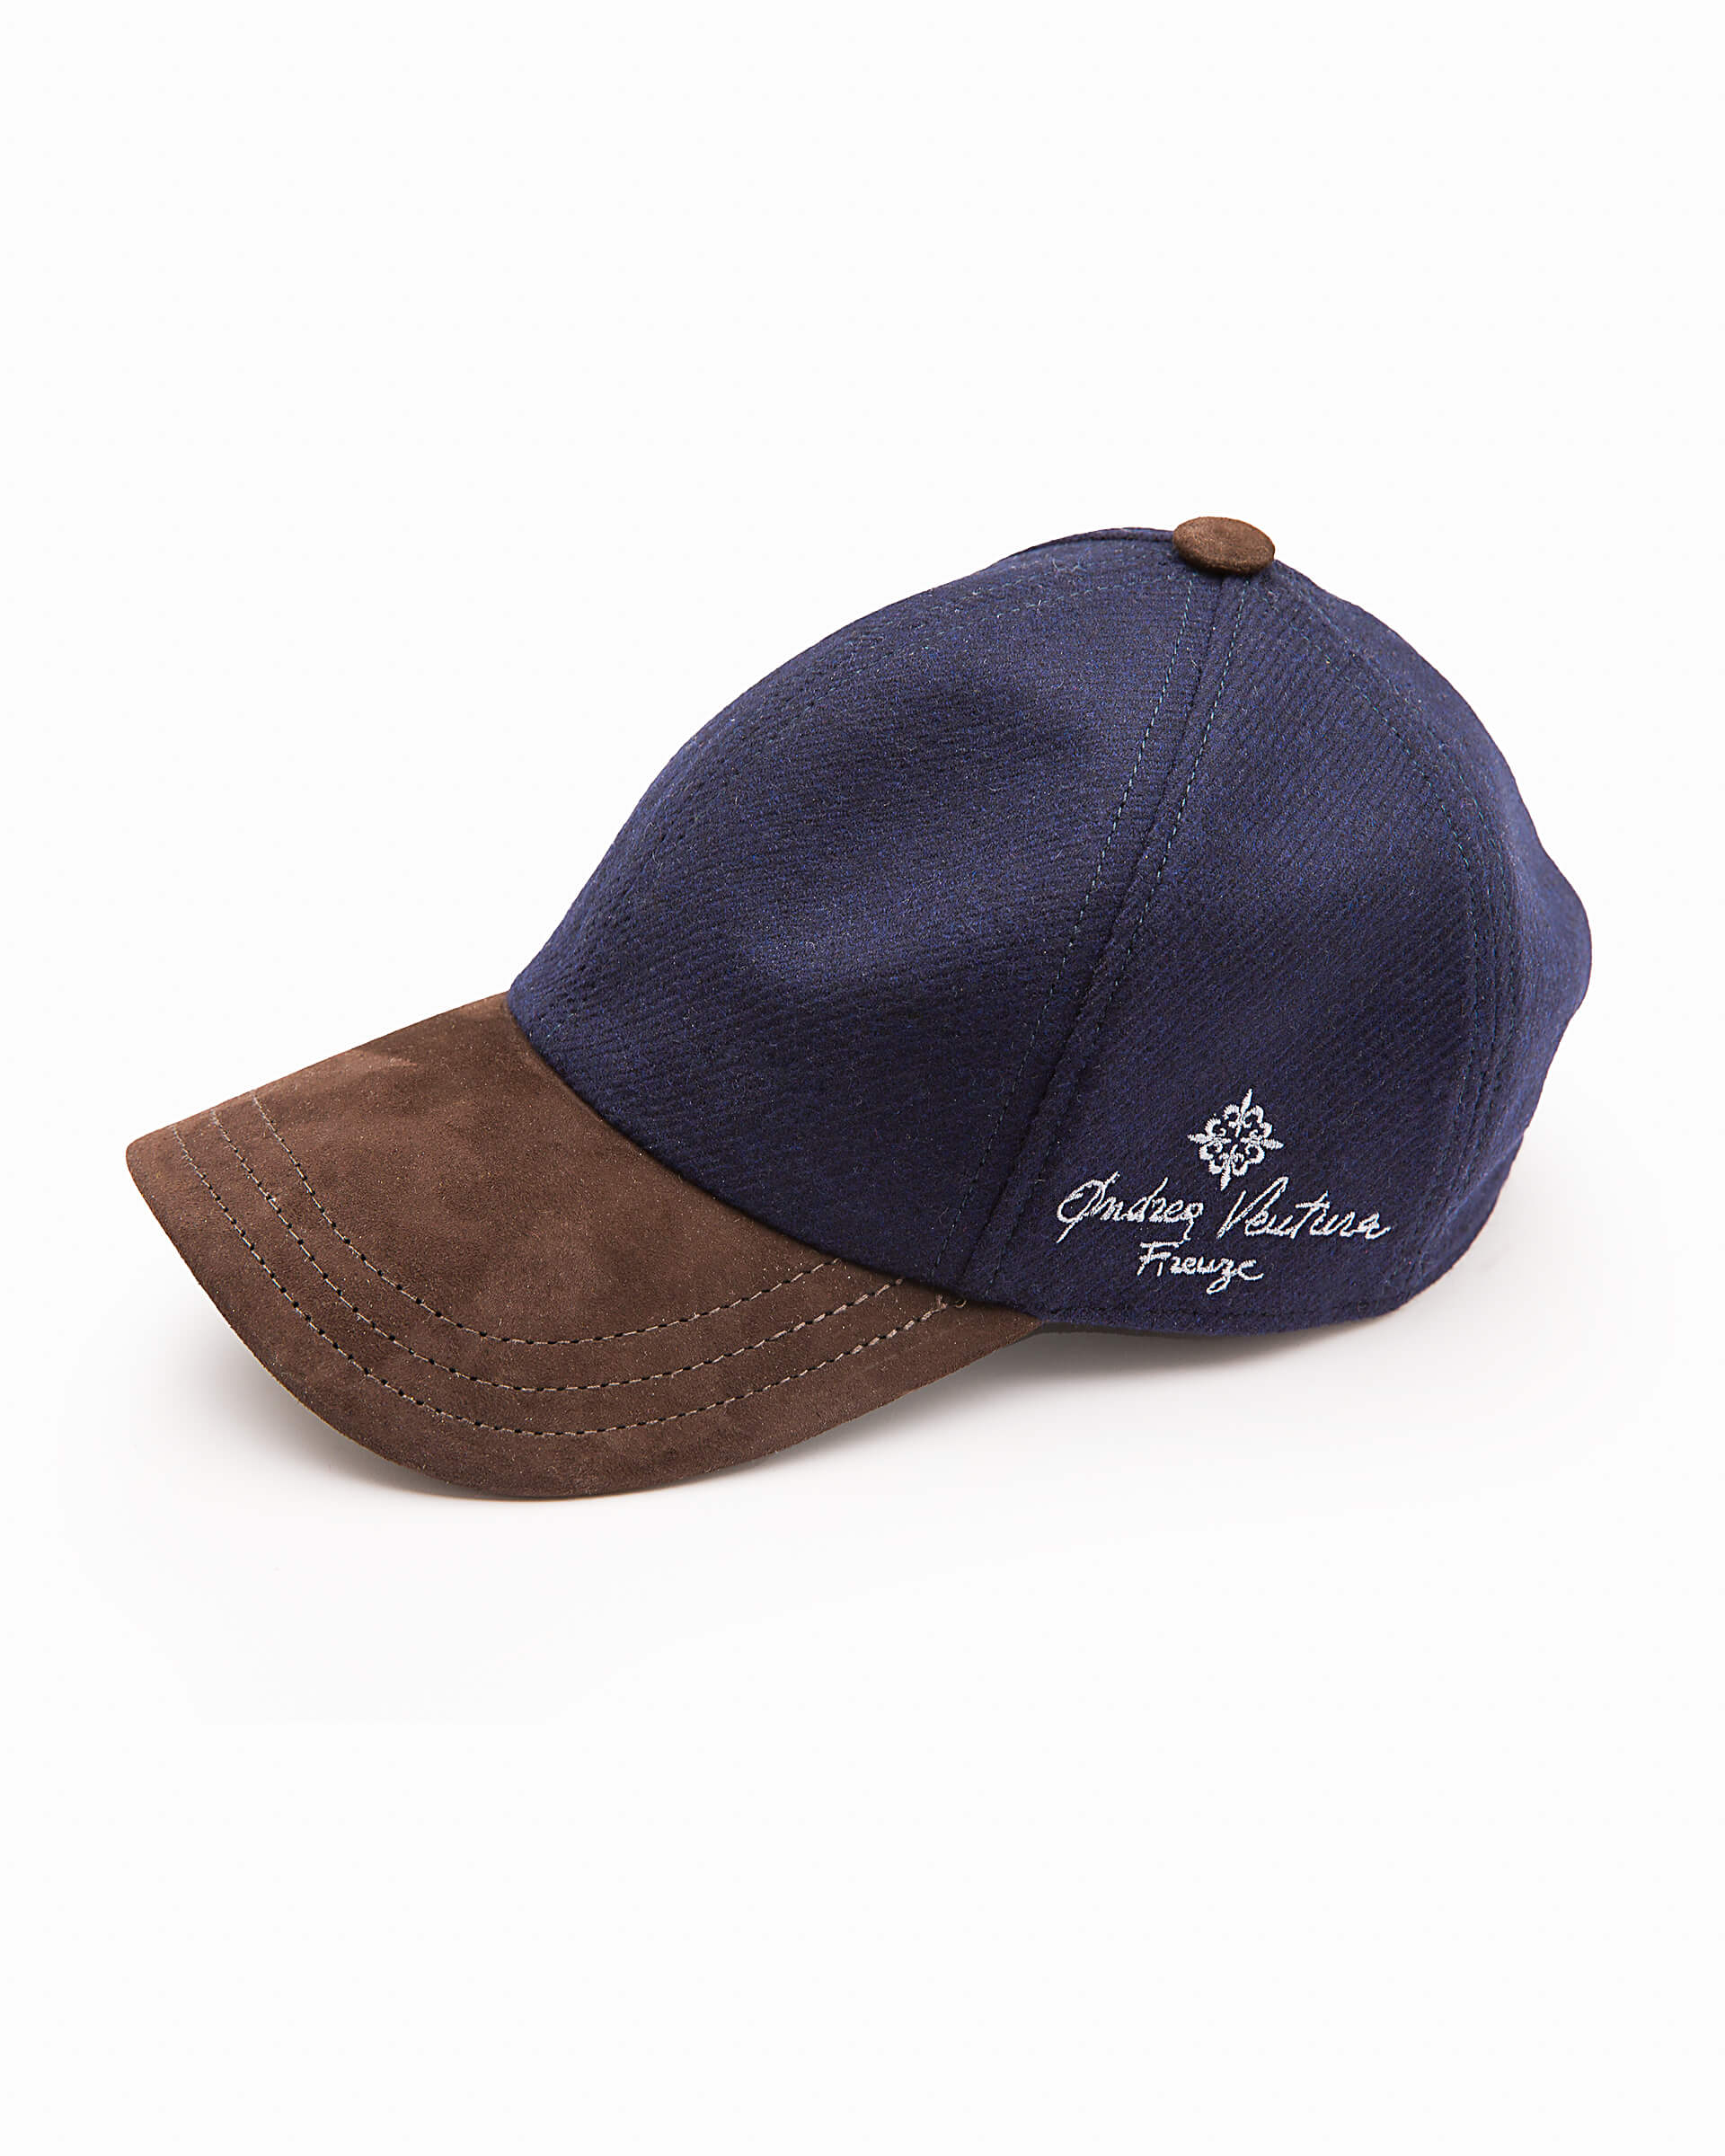 hat blue Ventura Baseball made of Andrea visor with water-repellent Firenze eclipse cap - cashmere